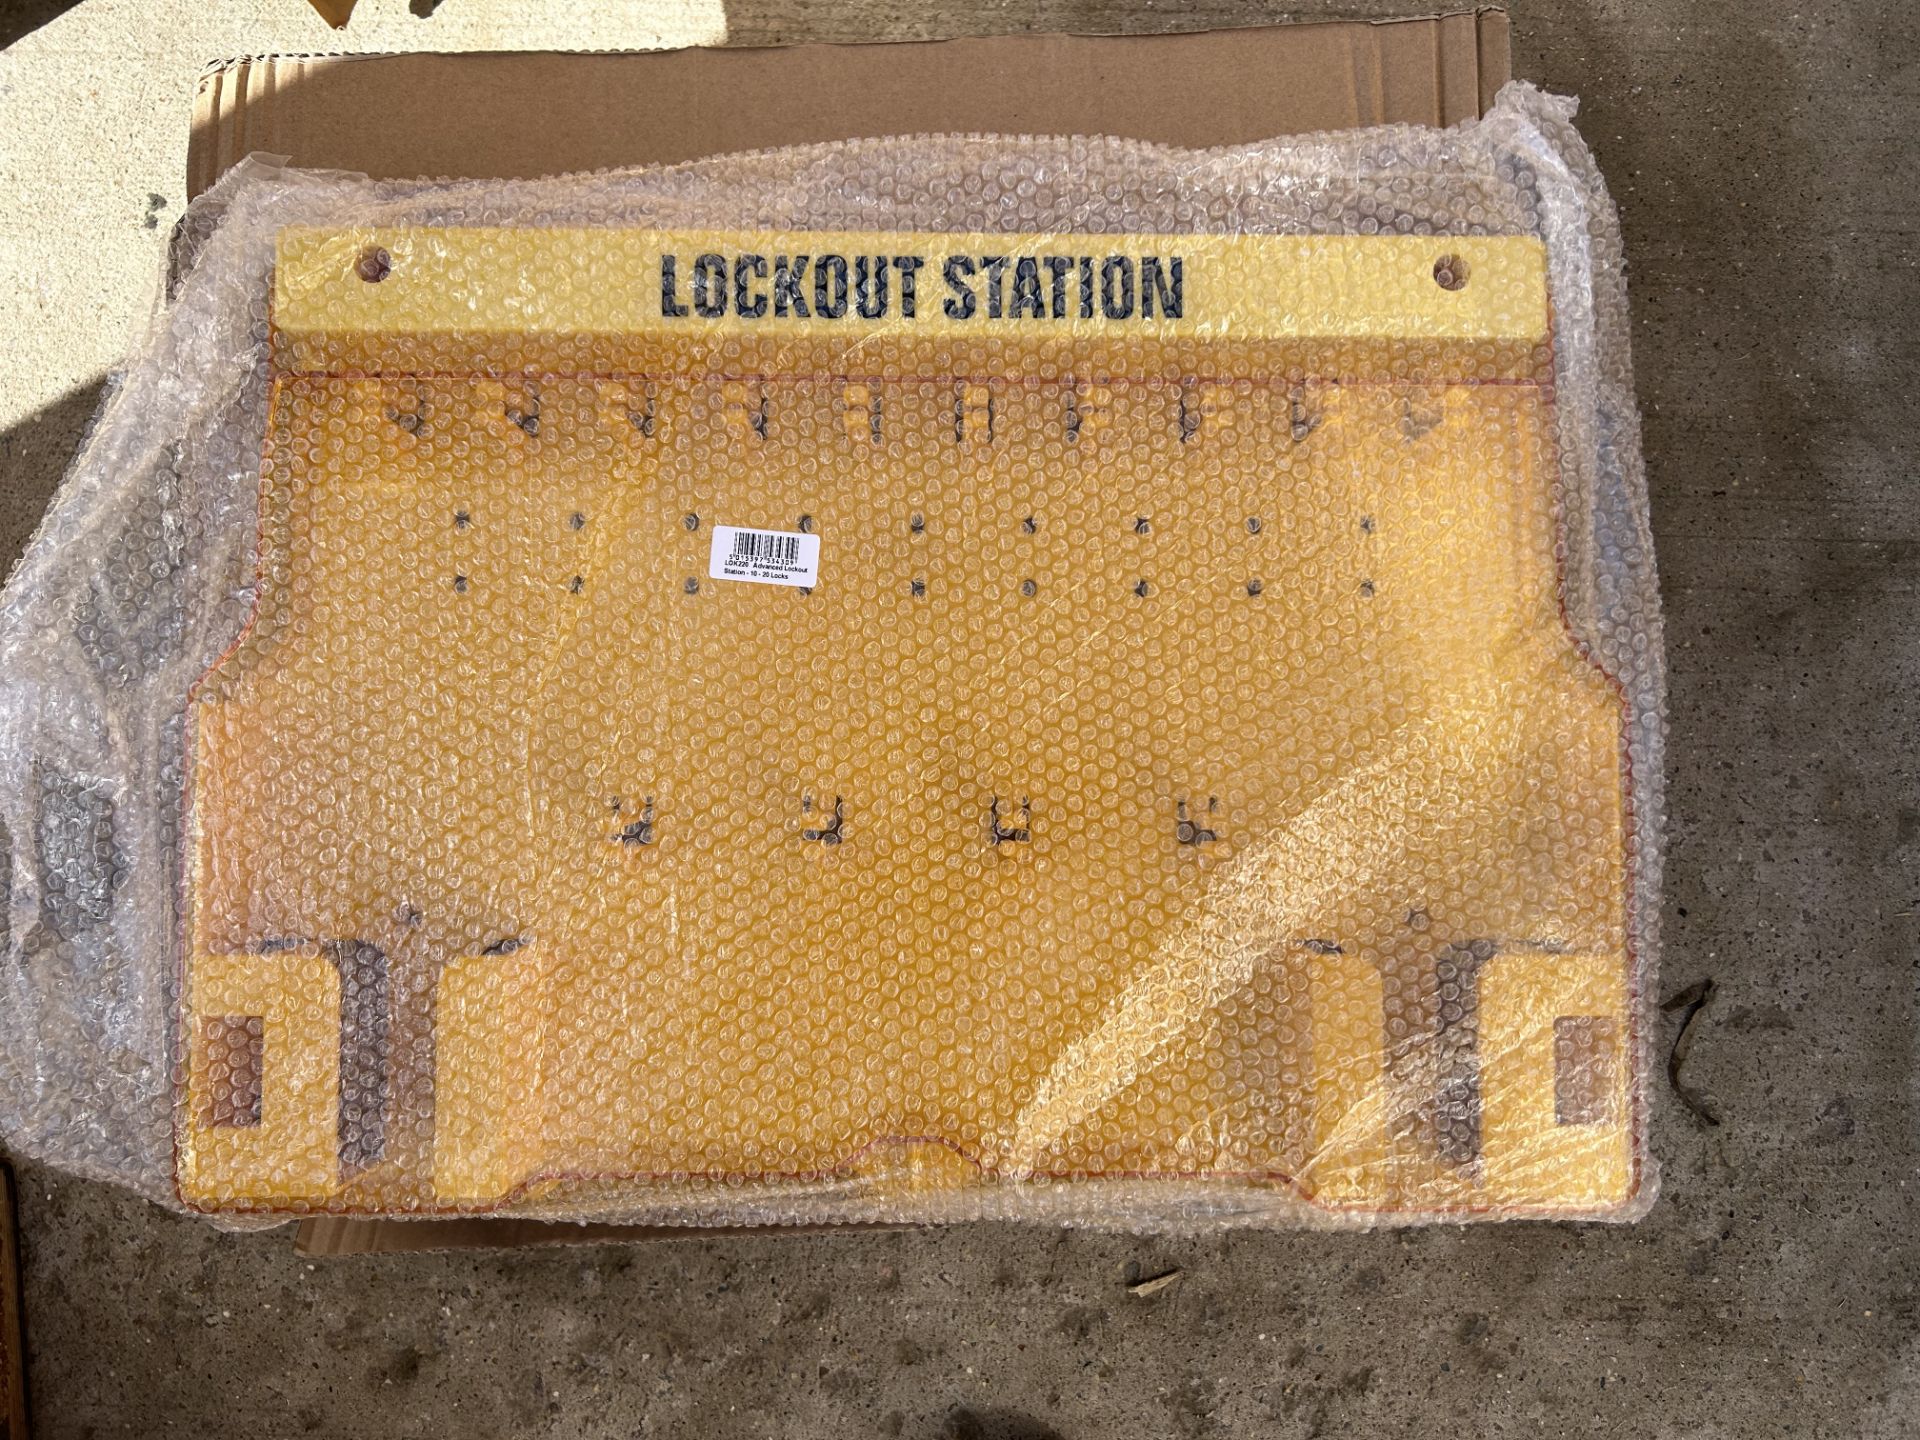 2x MATLOCK ADVANCED LOCKOUT SITE SAFETY STATION 10-20 LOCKS - NEW SEALED RRP £150